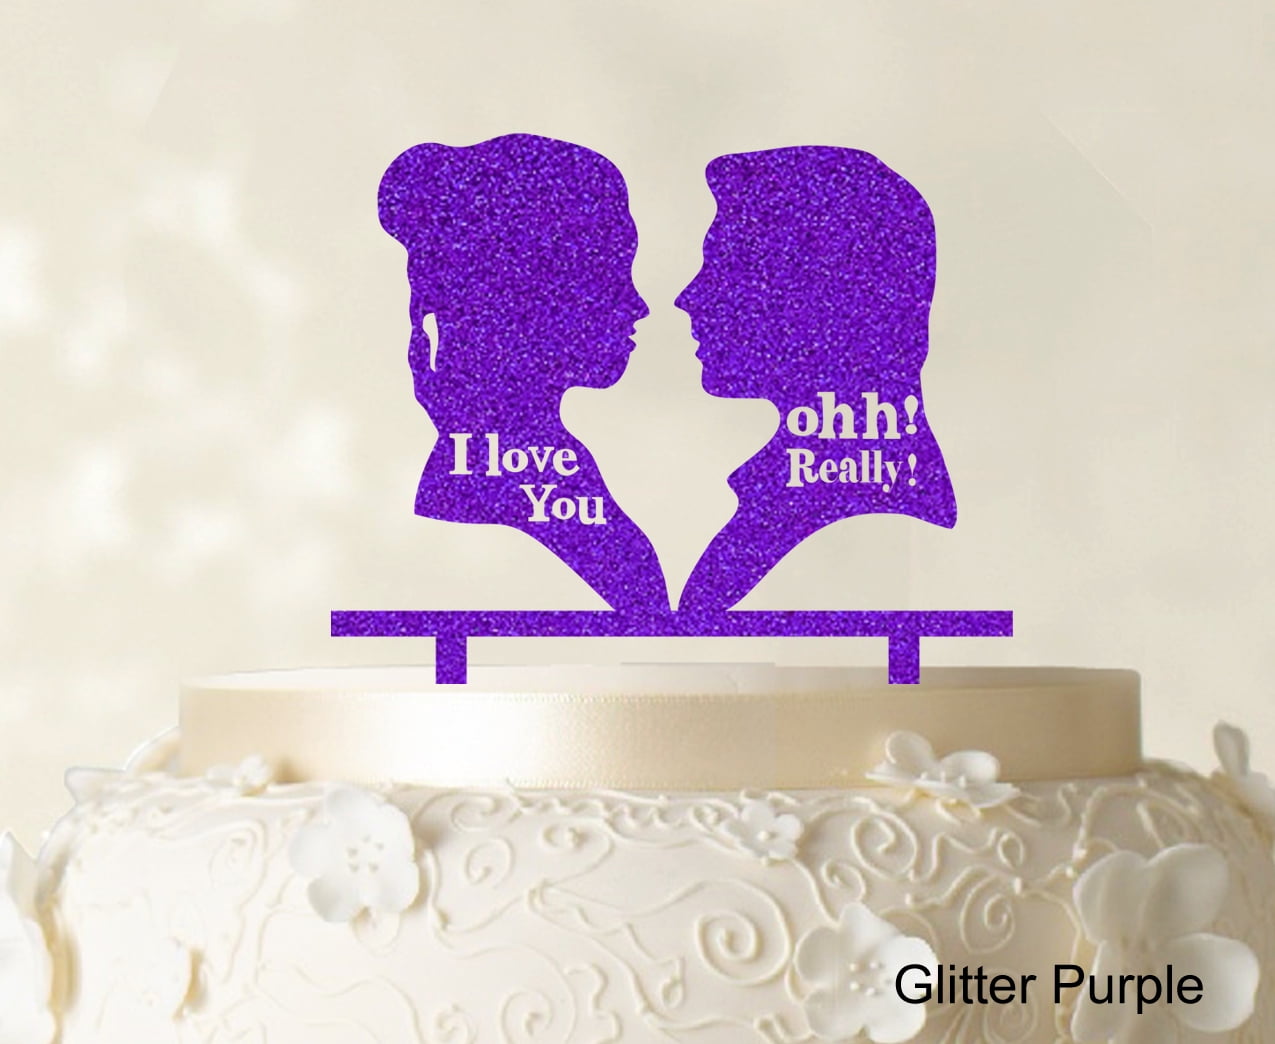 Black Wedding Cake Toppers